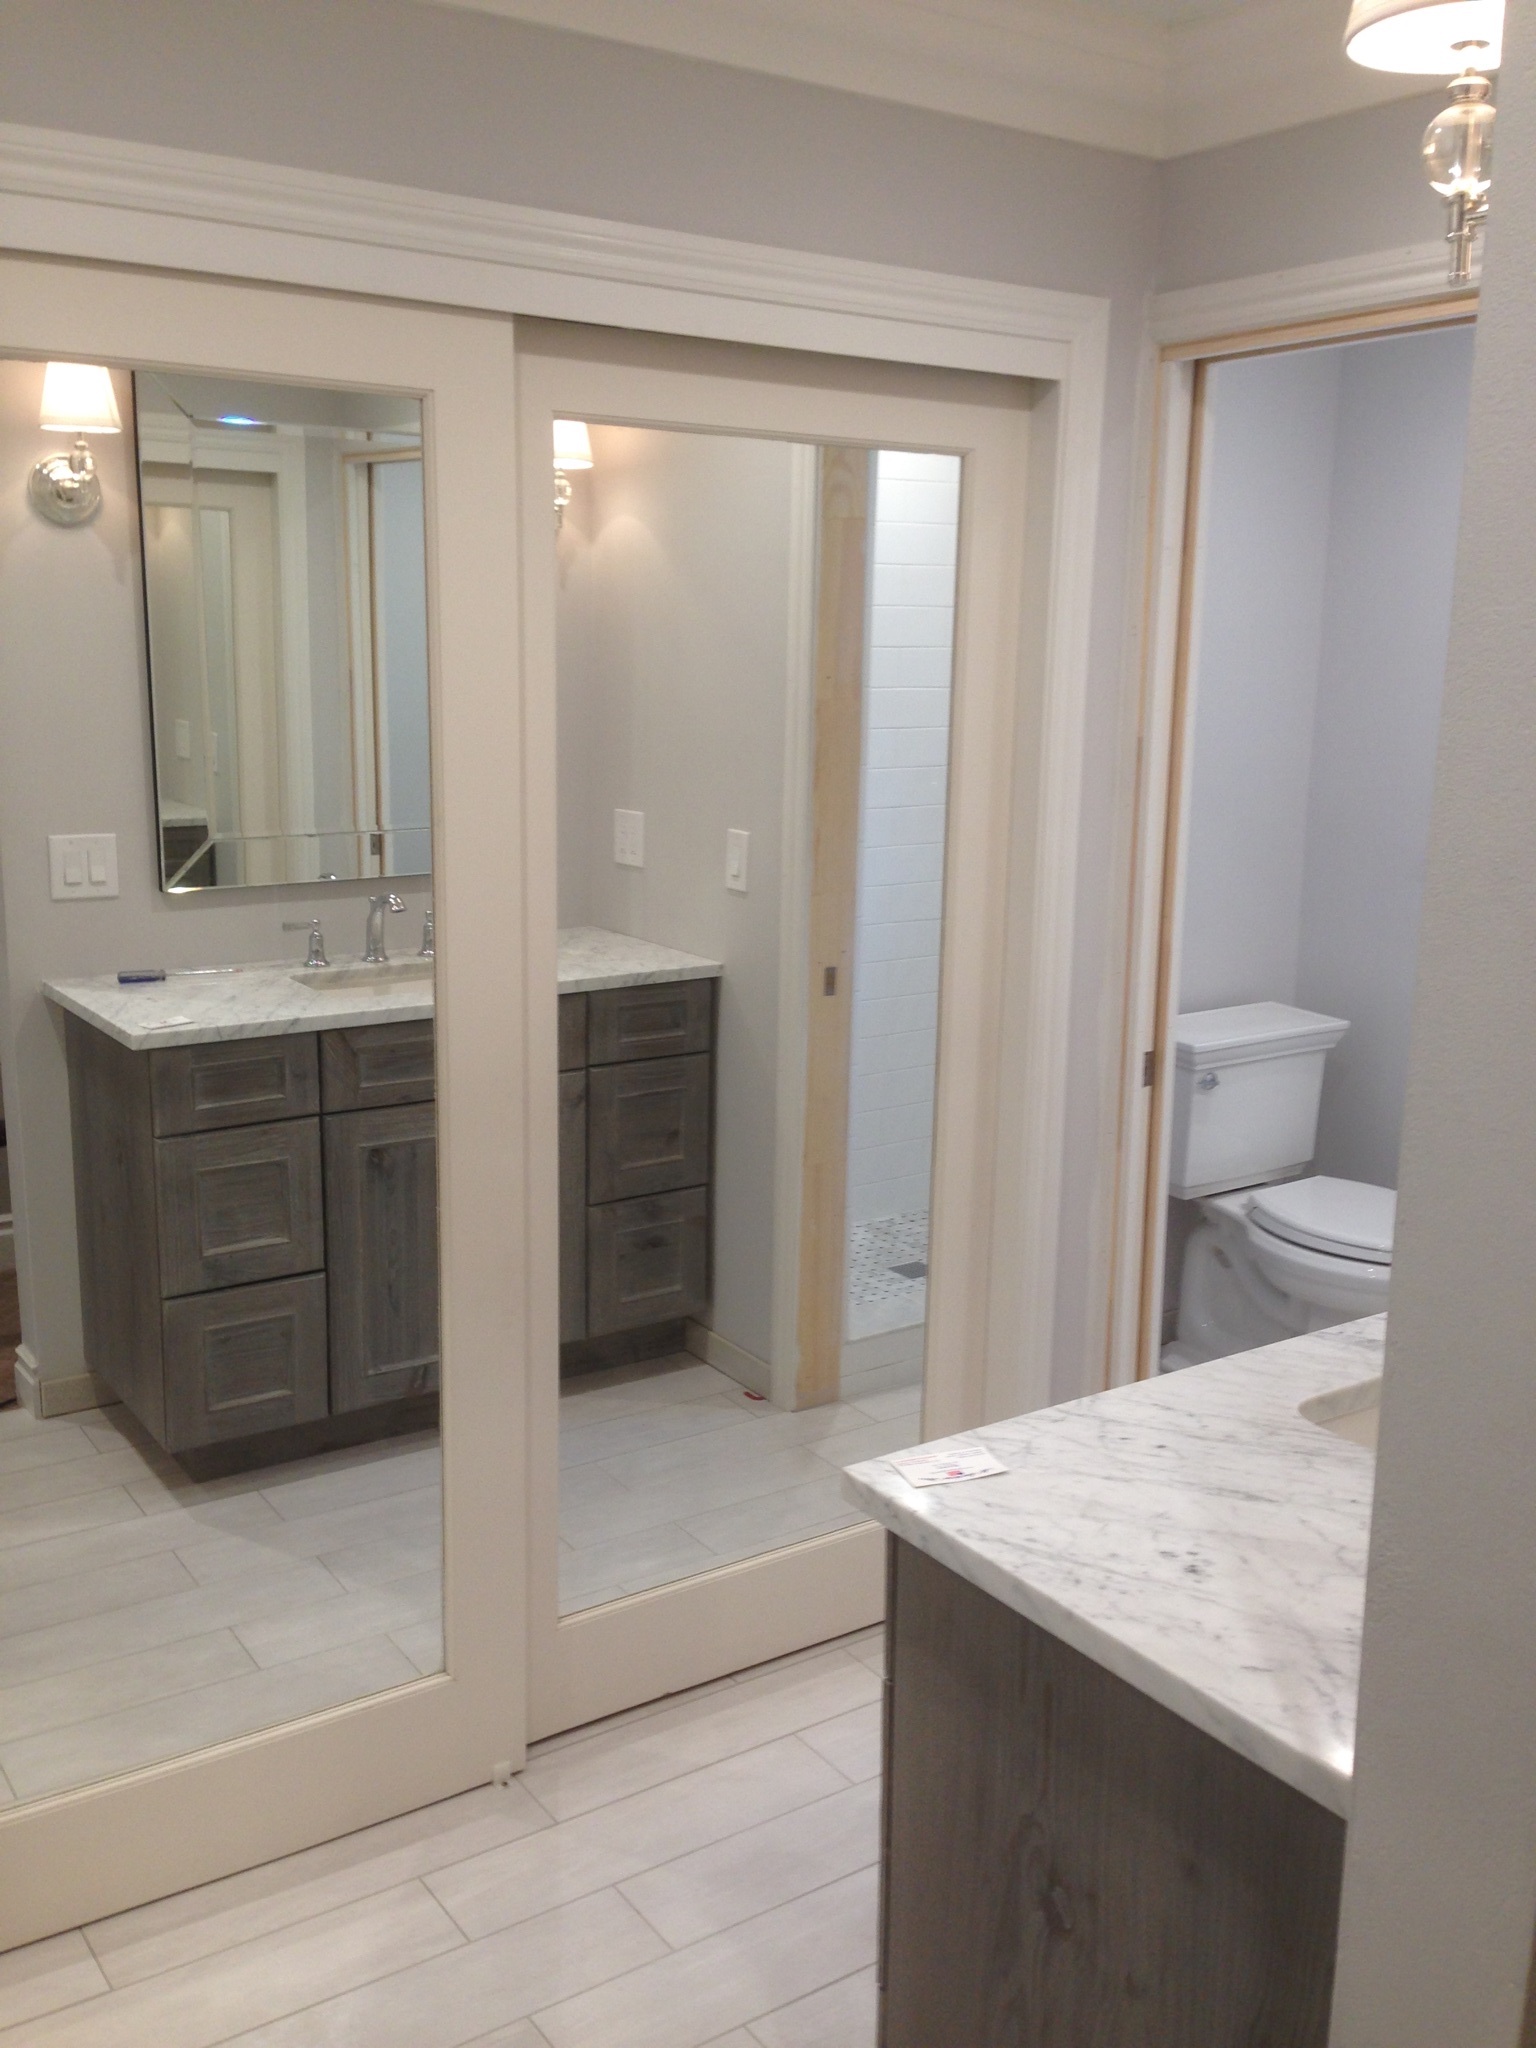 Outdated Master Bathroom Opens Up With, Are Mirrored Closet Doors Outdated 2020